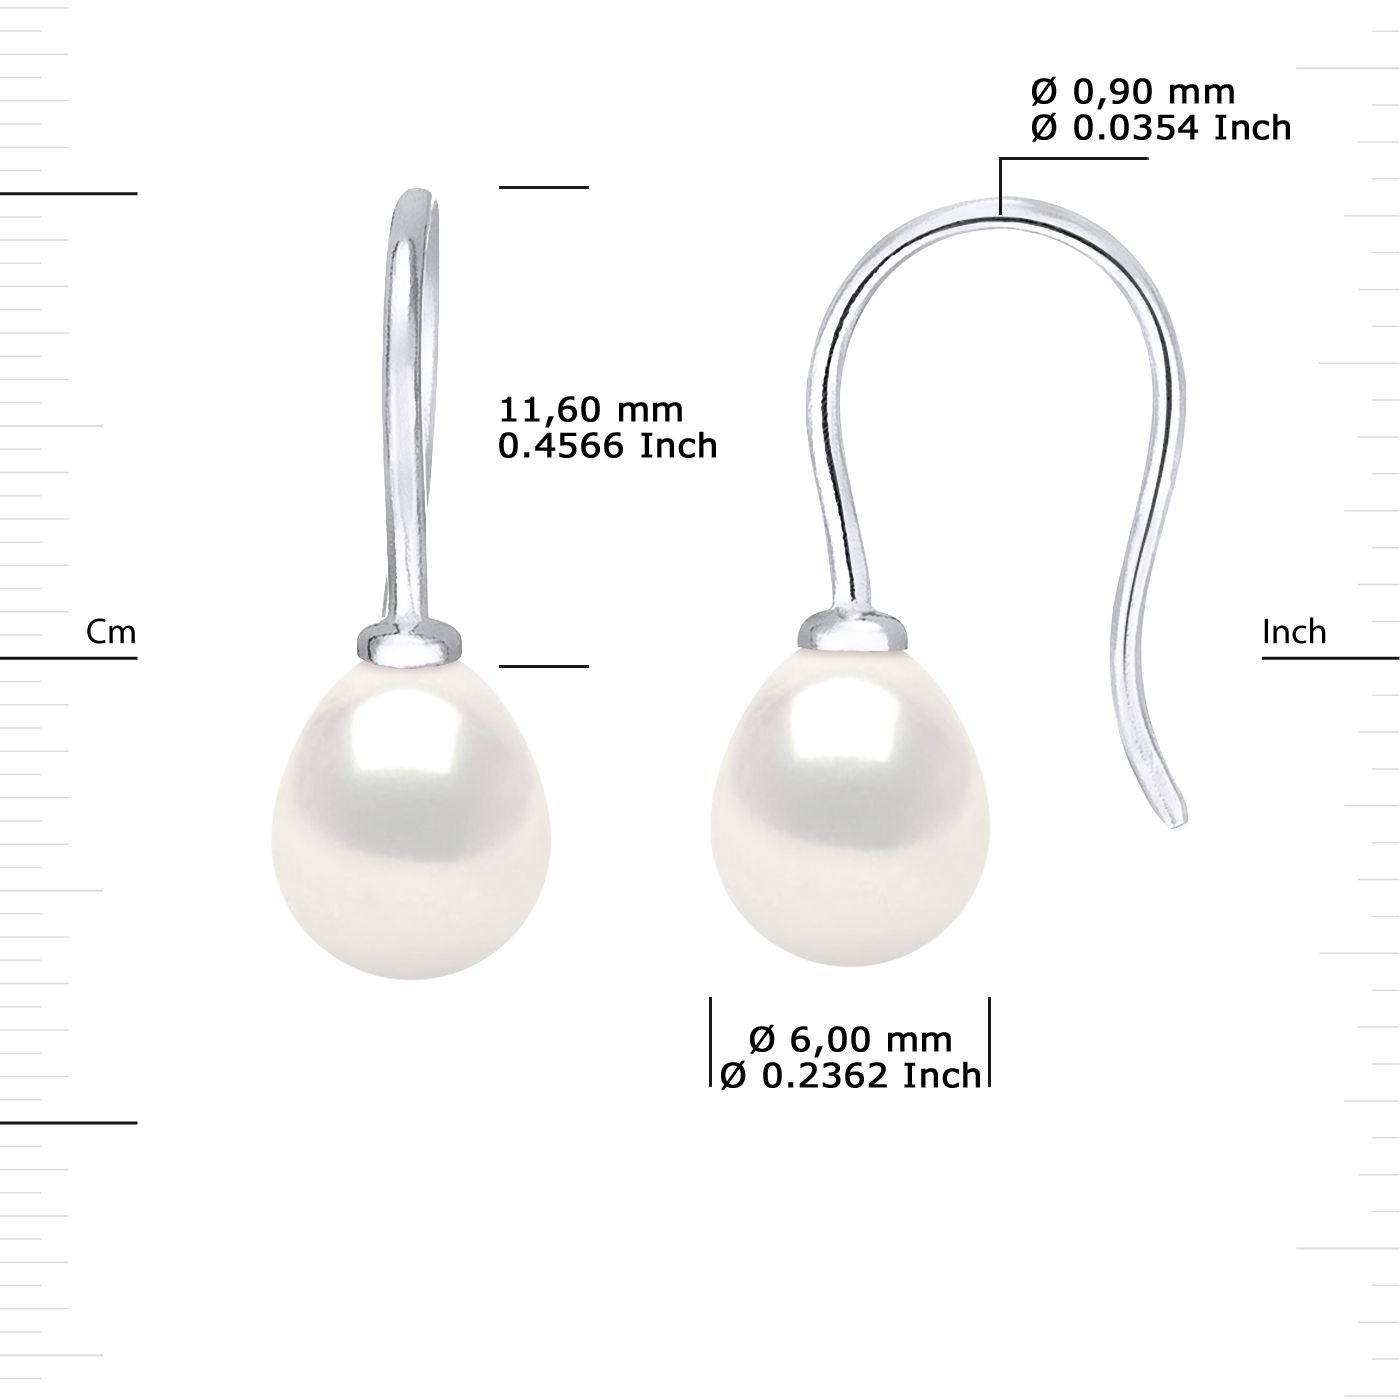 Earrings of 925 Sterling Silver and true Cultured Freshwater Pearls Pear Shape 6-7 mm - 0,24 in - Natural White Color and Hook system - Our jewellery is made in France and will be delivered in a gift box accompanied by a Certificate of Authenticity and International Warranty